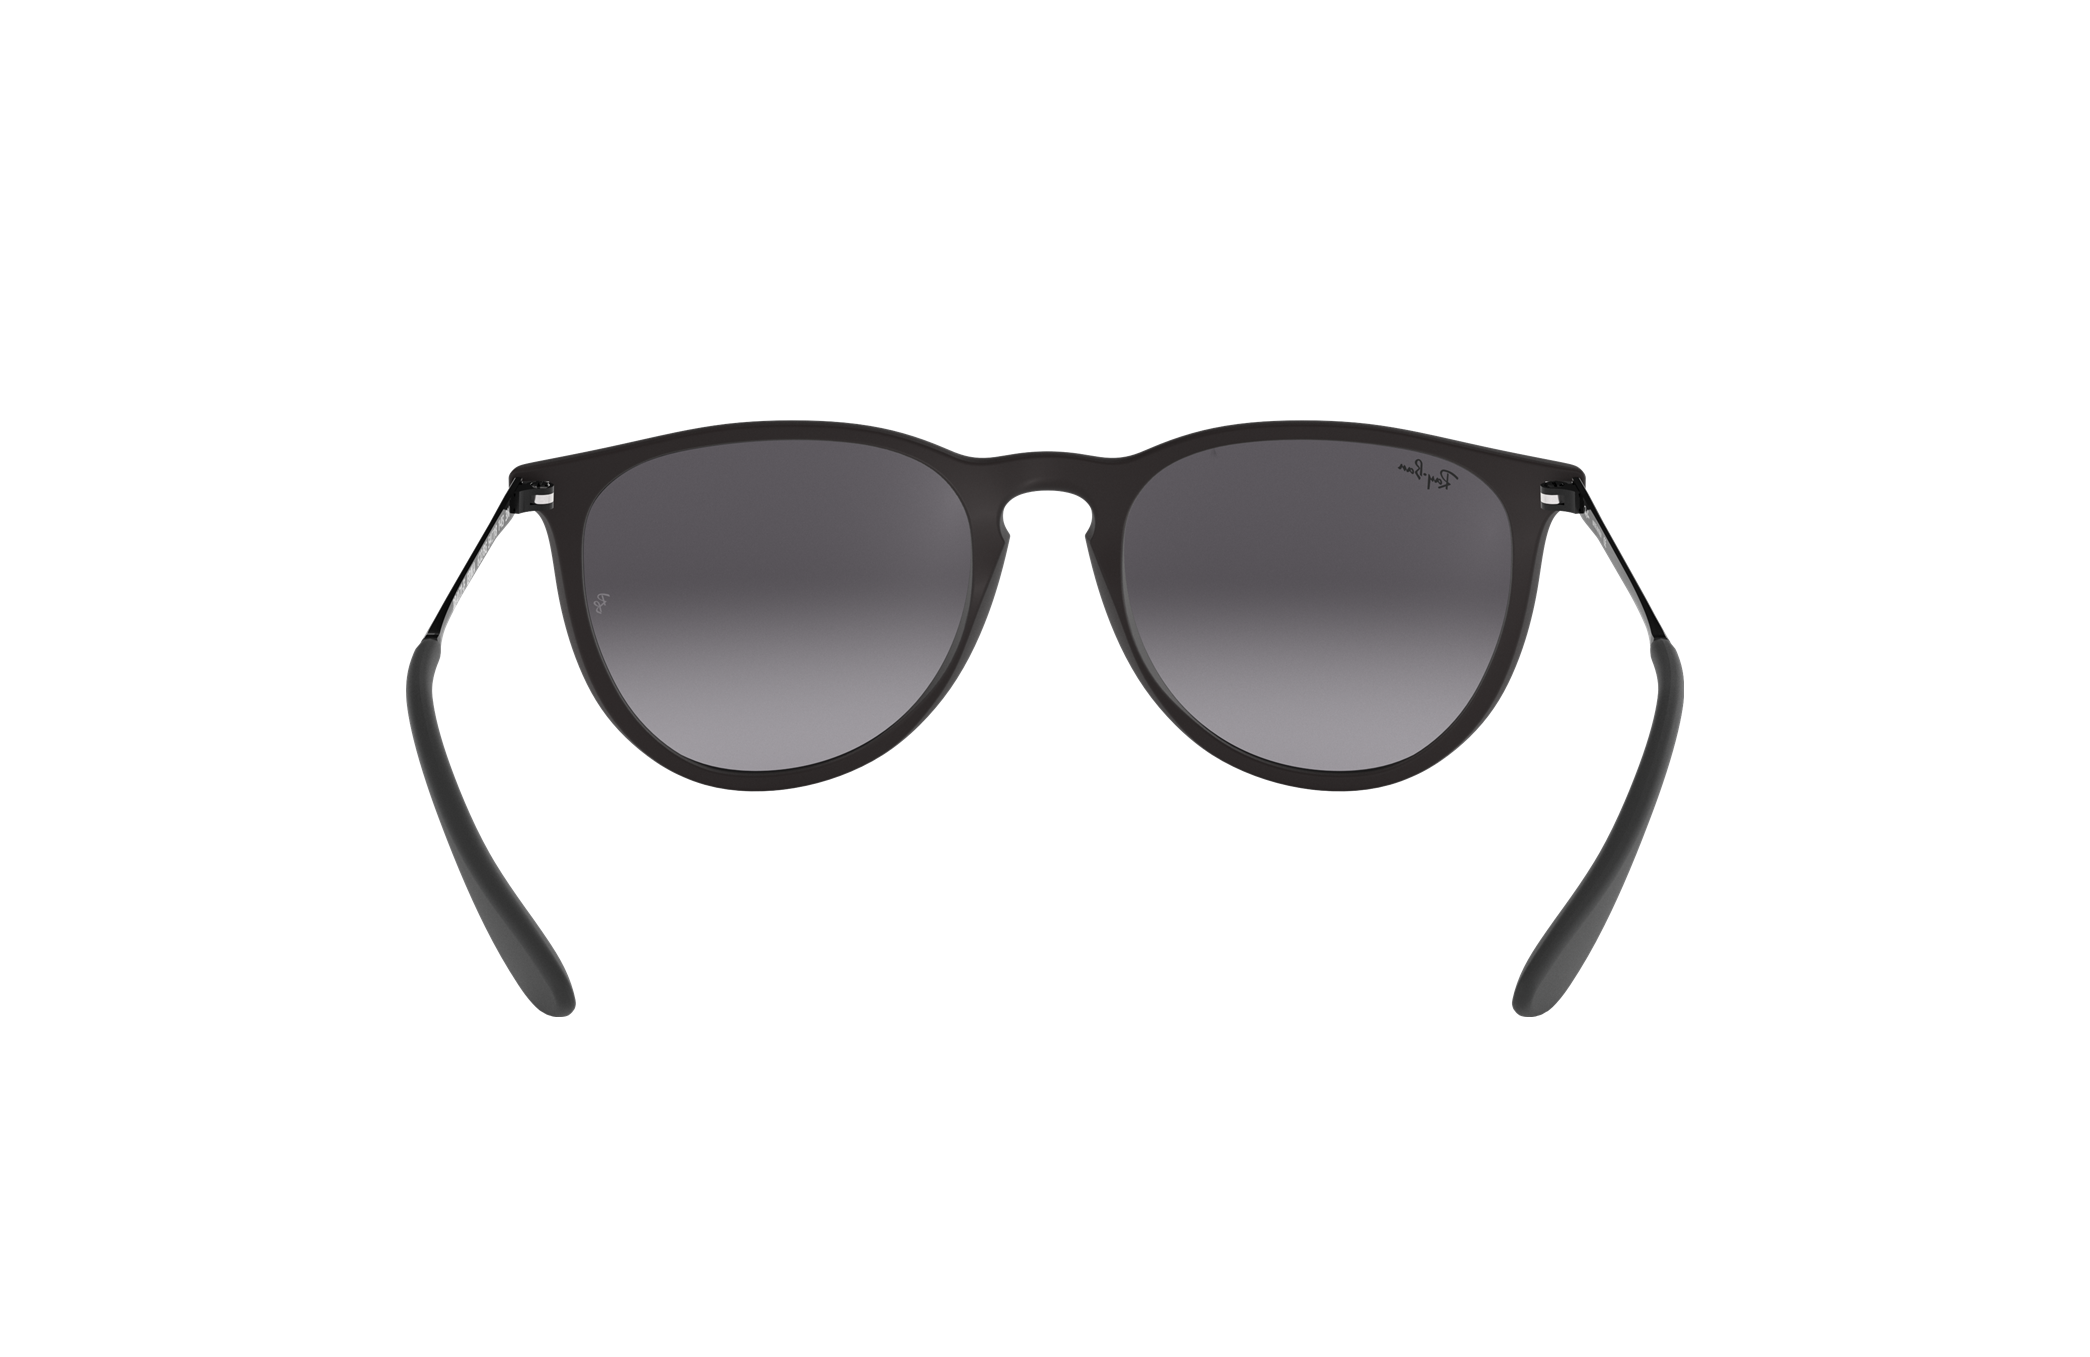 ERIKA CLASSIC Sunglasses in Black and Grey   RBF   Ray Ban